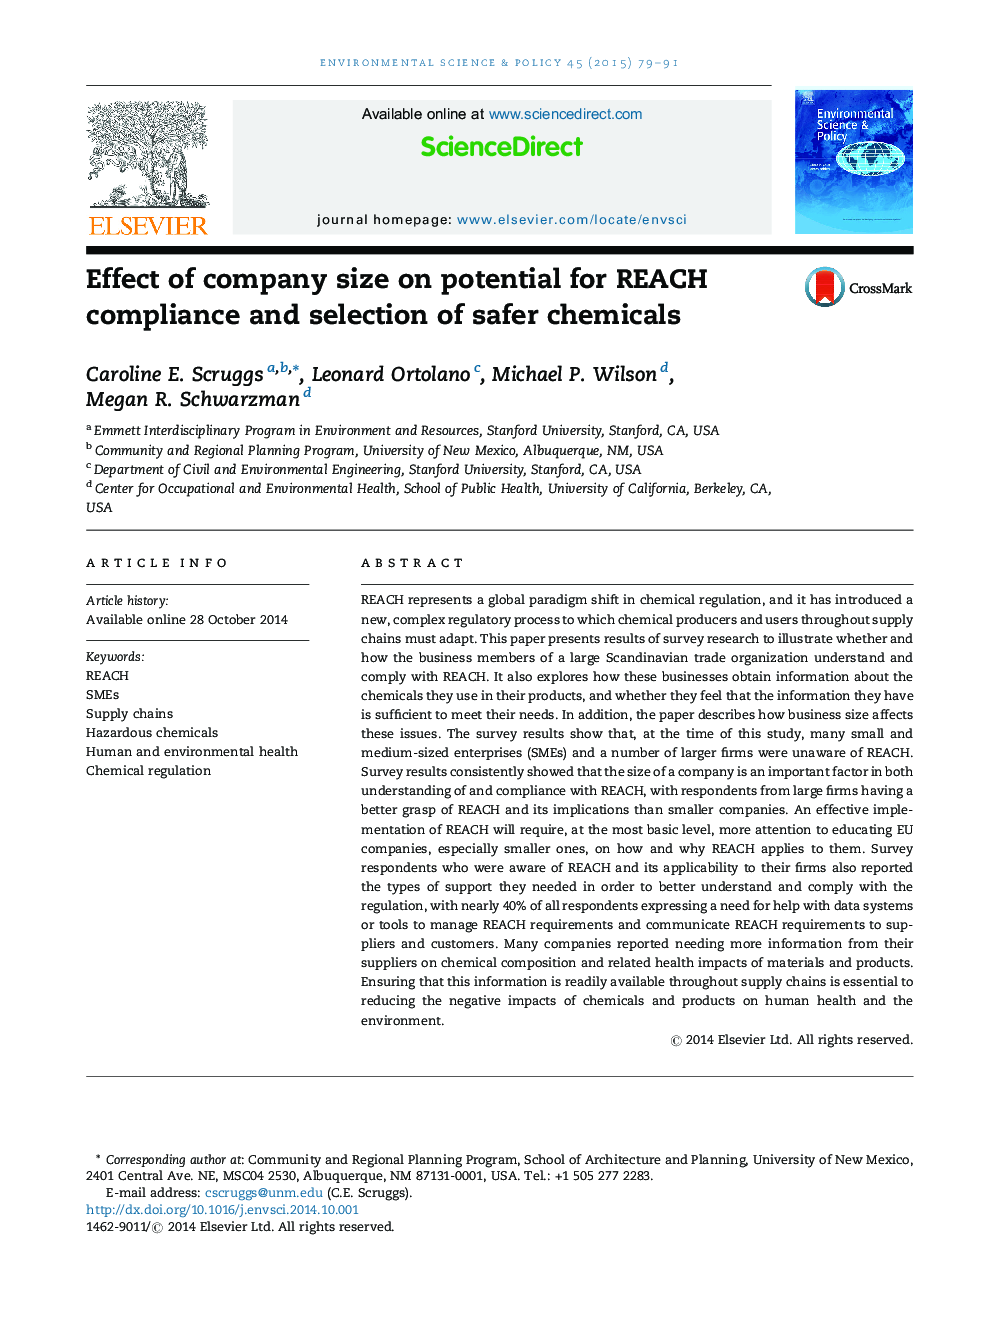 Effect of company size on potential for REACH compliance and selection of safer chemicals